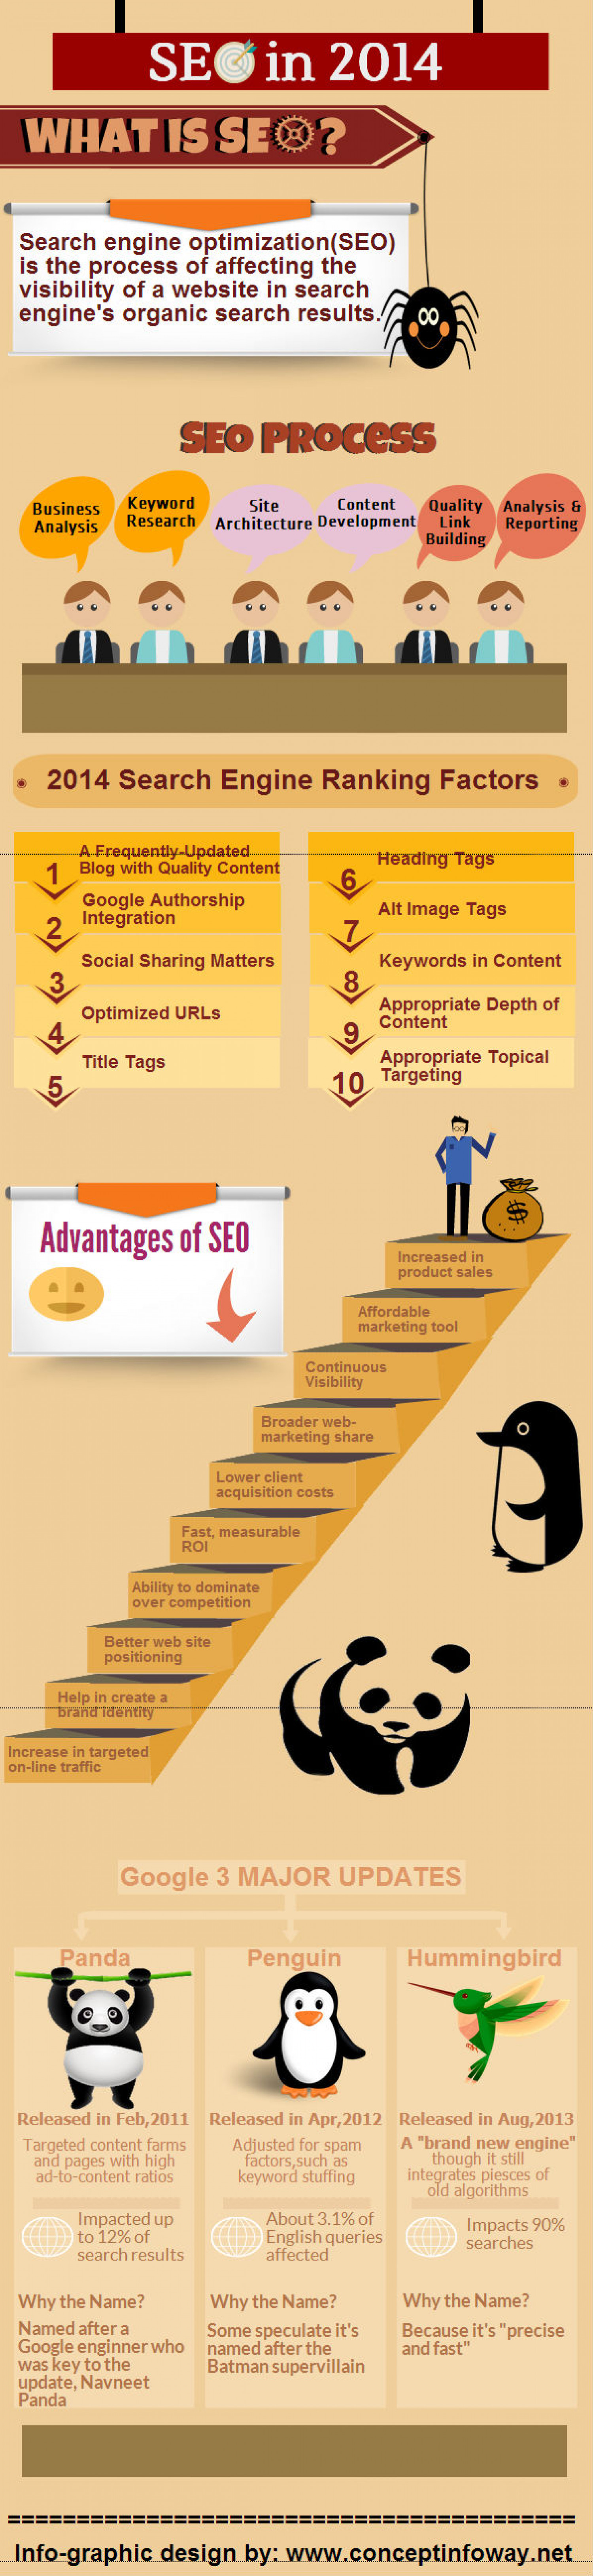 SEO in 2014 Infographic